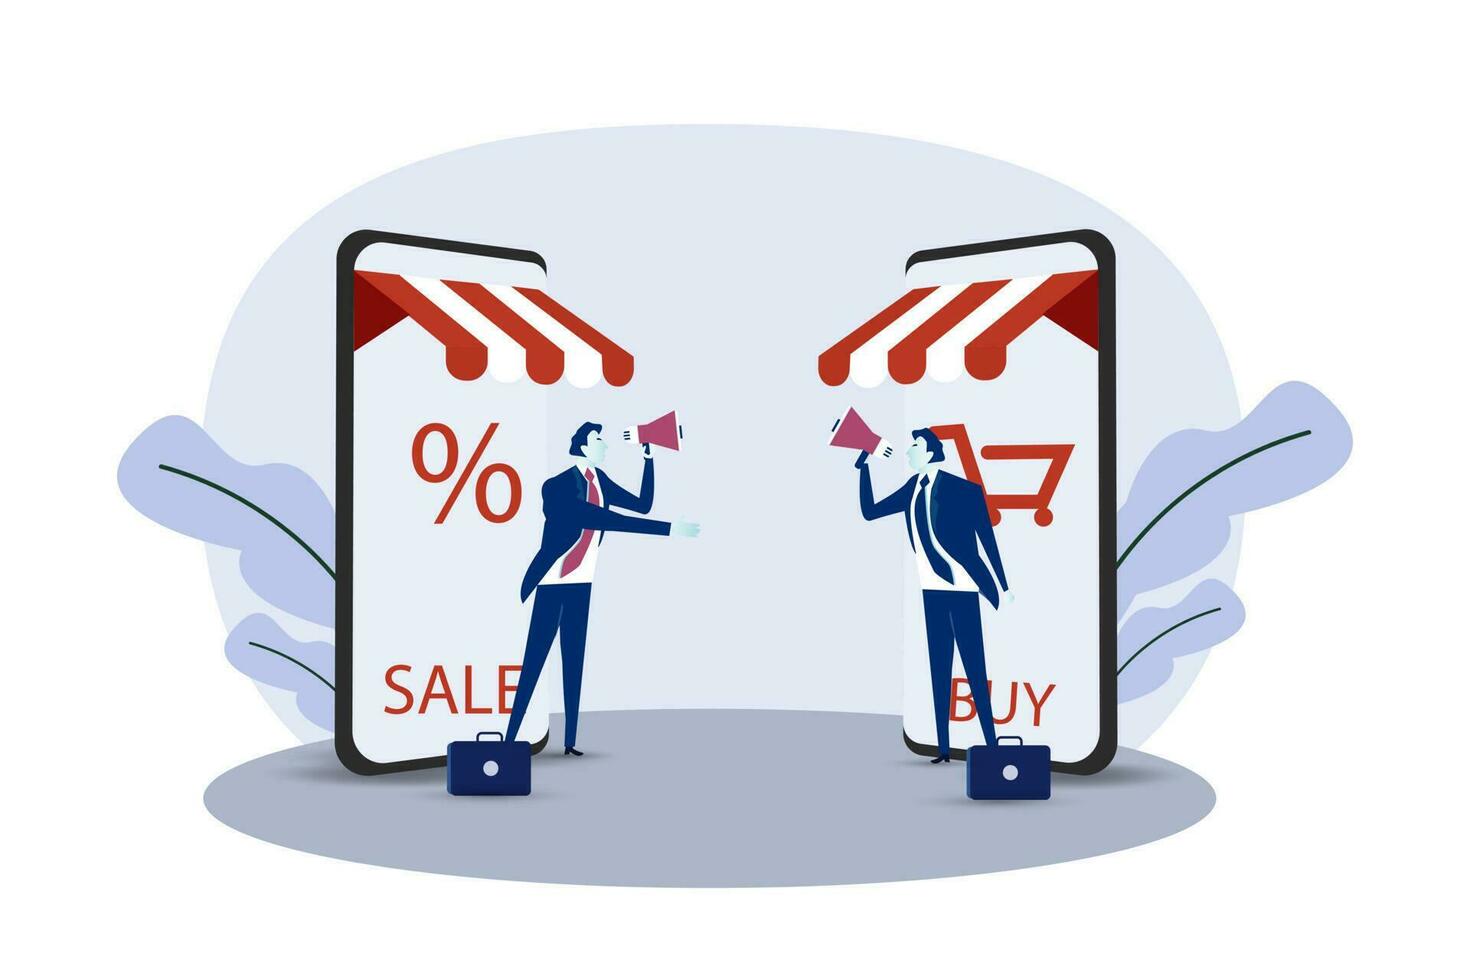 Two businessman offer via Online store sales promotion concept discounted sales prices, decreases, shopping. vector